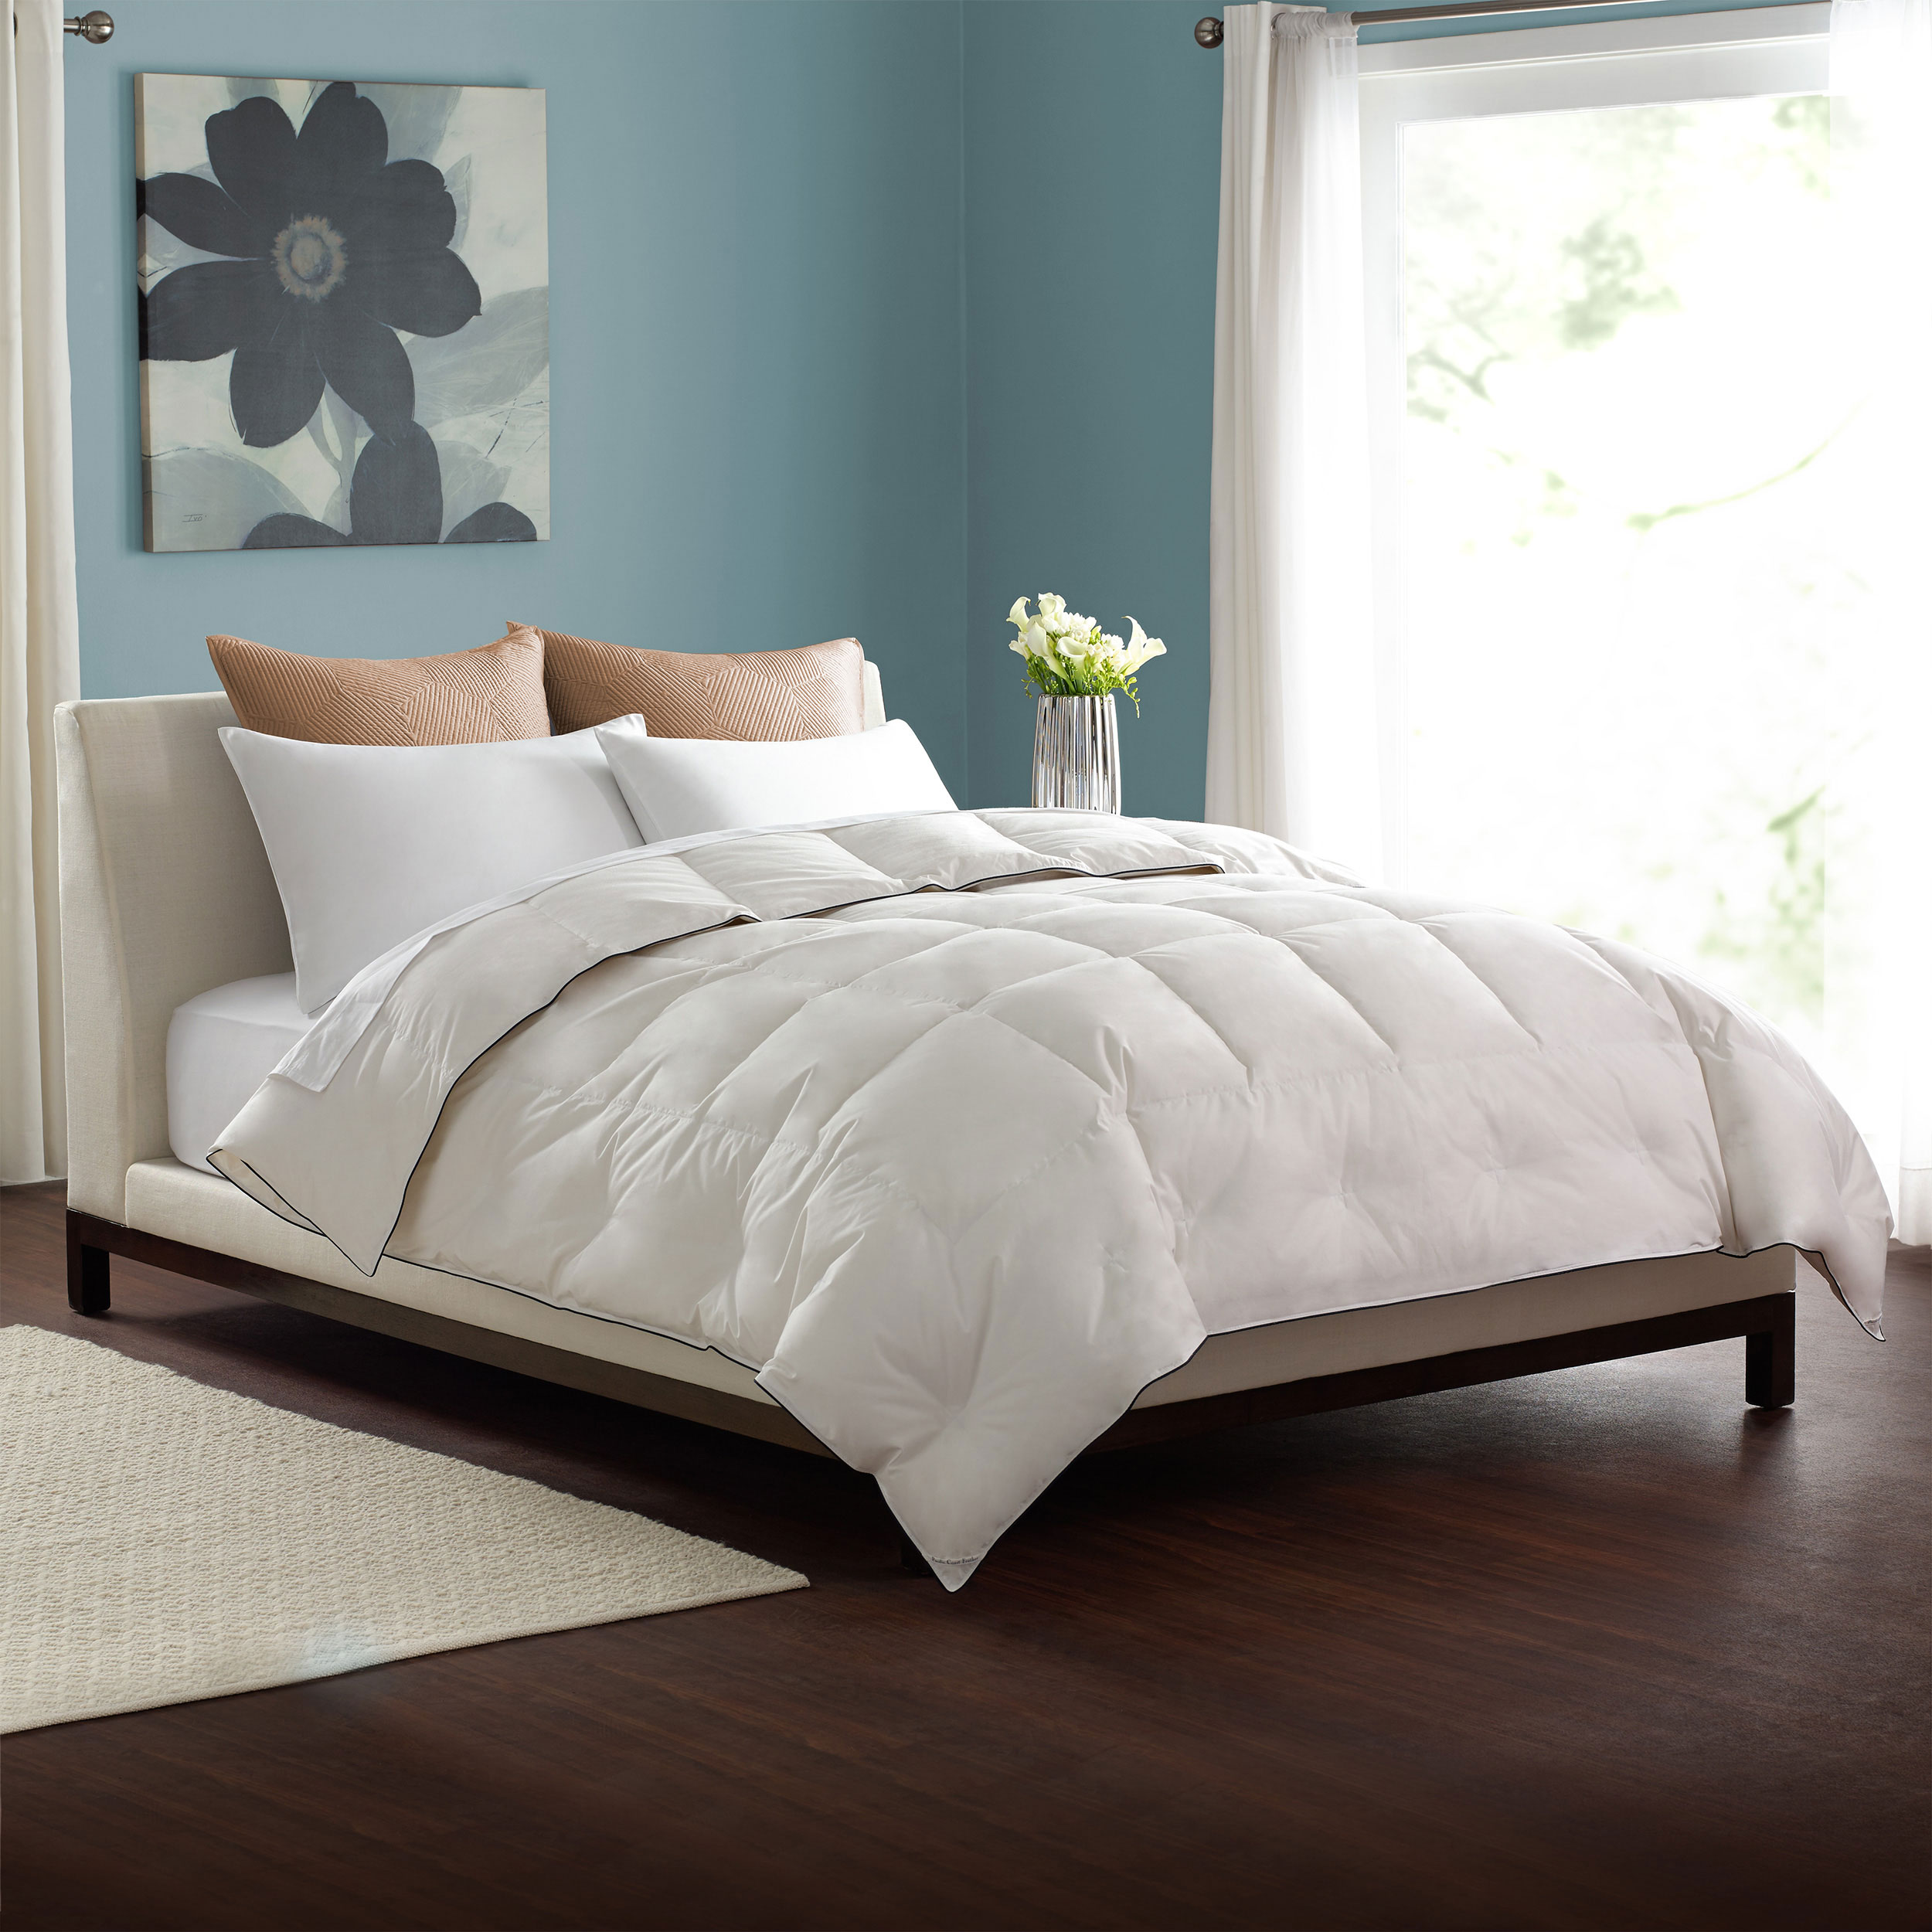 Pacific Coast Light Weight Comforter 300 Thread Count 550 Fill Power Down - Full/queen